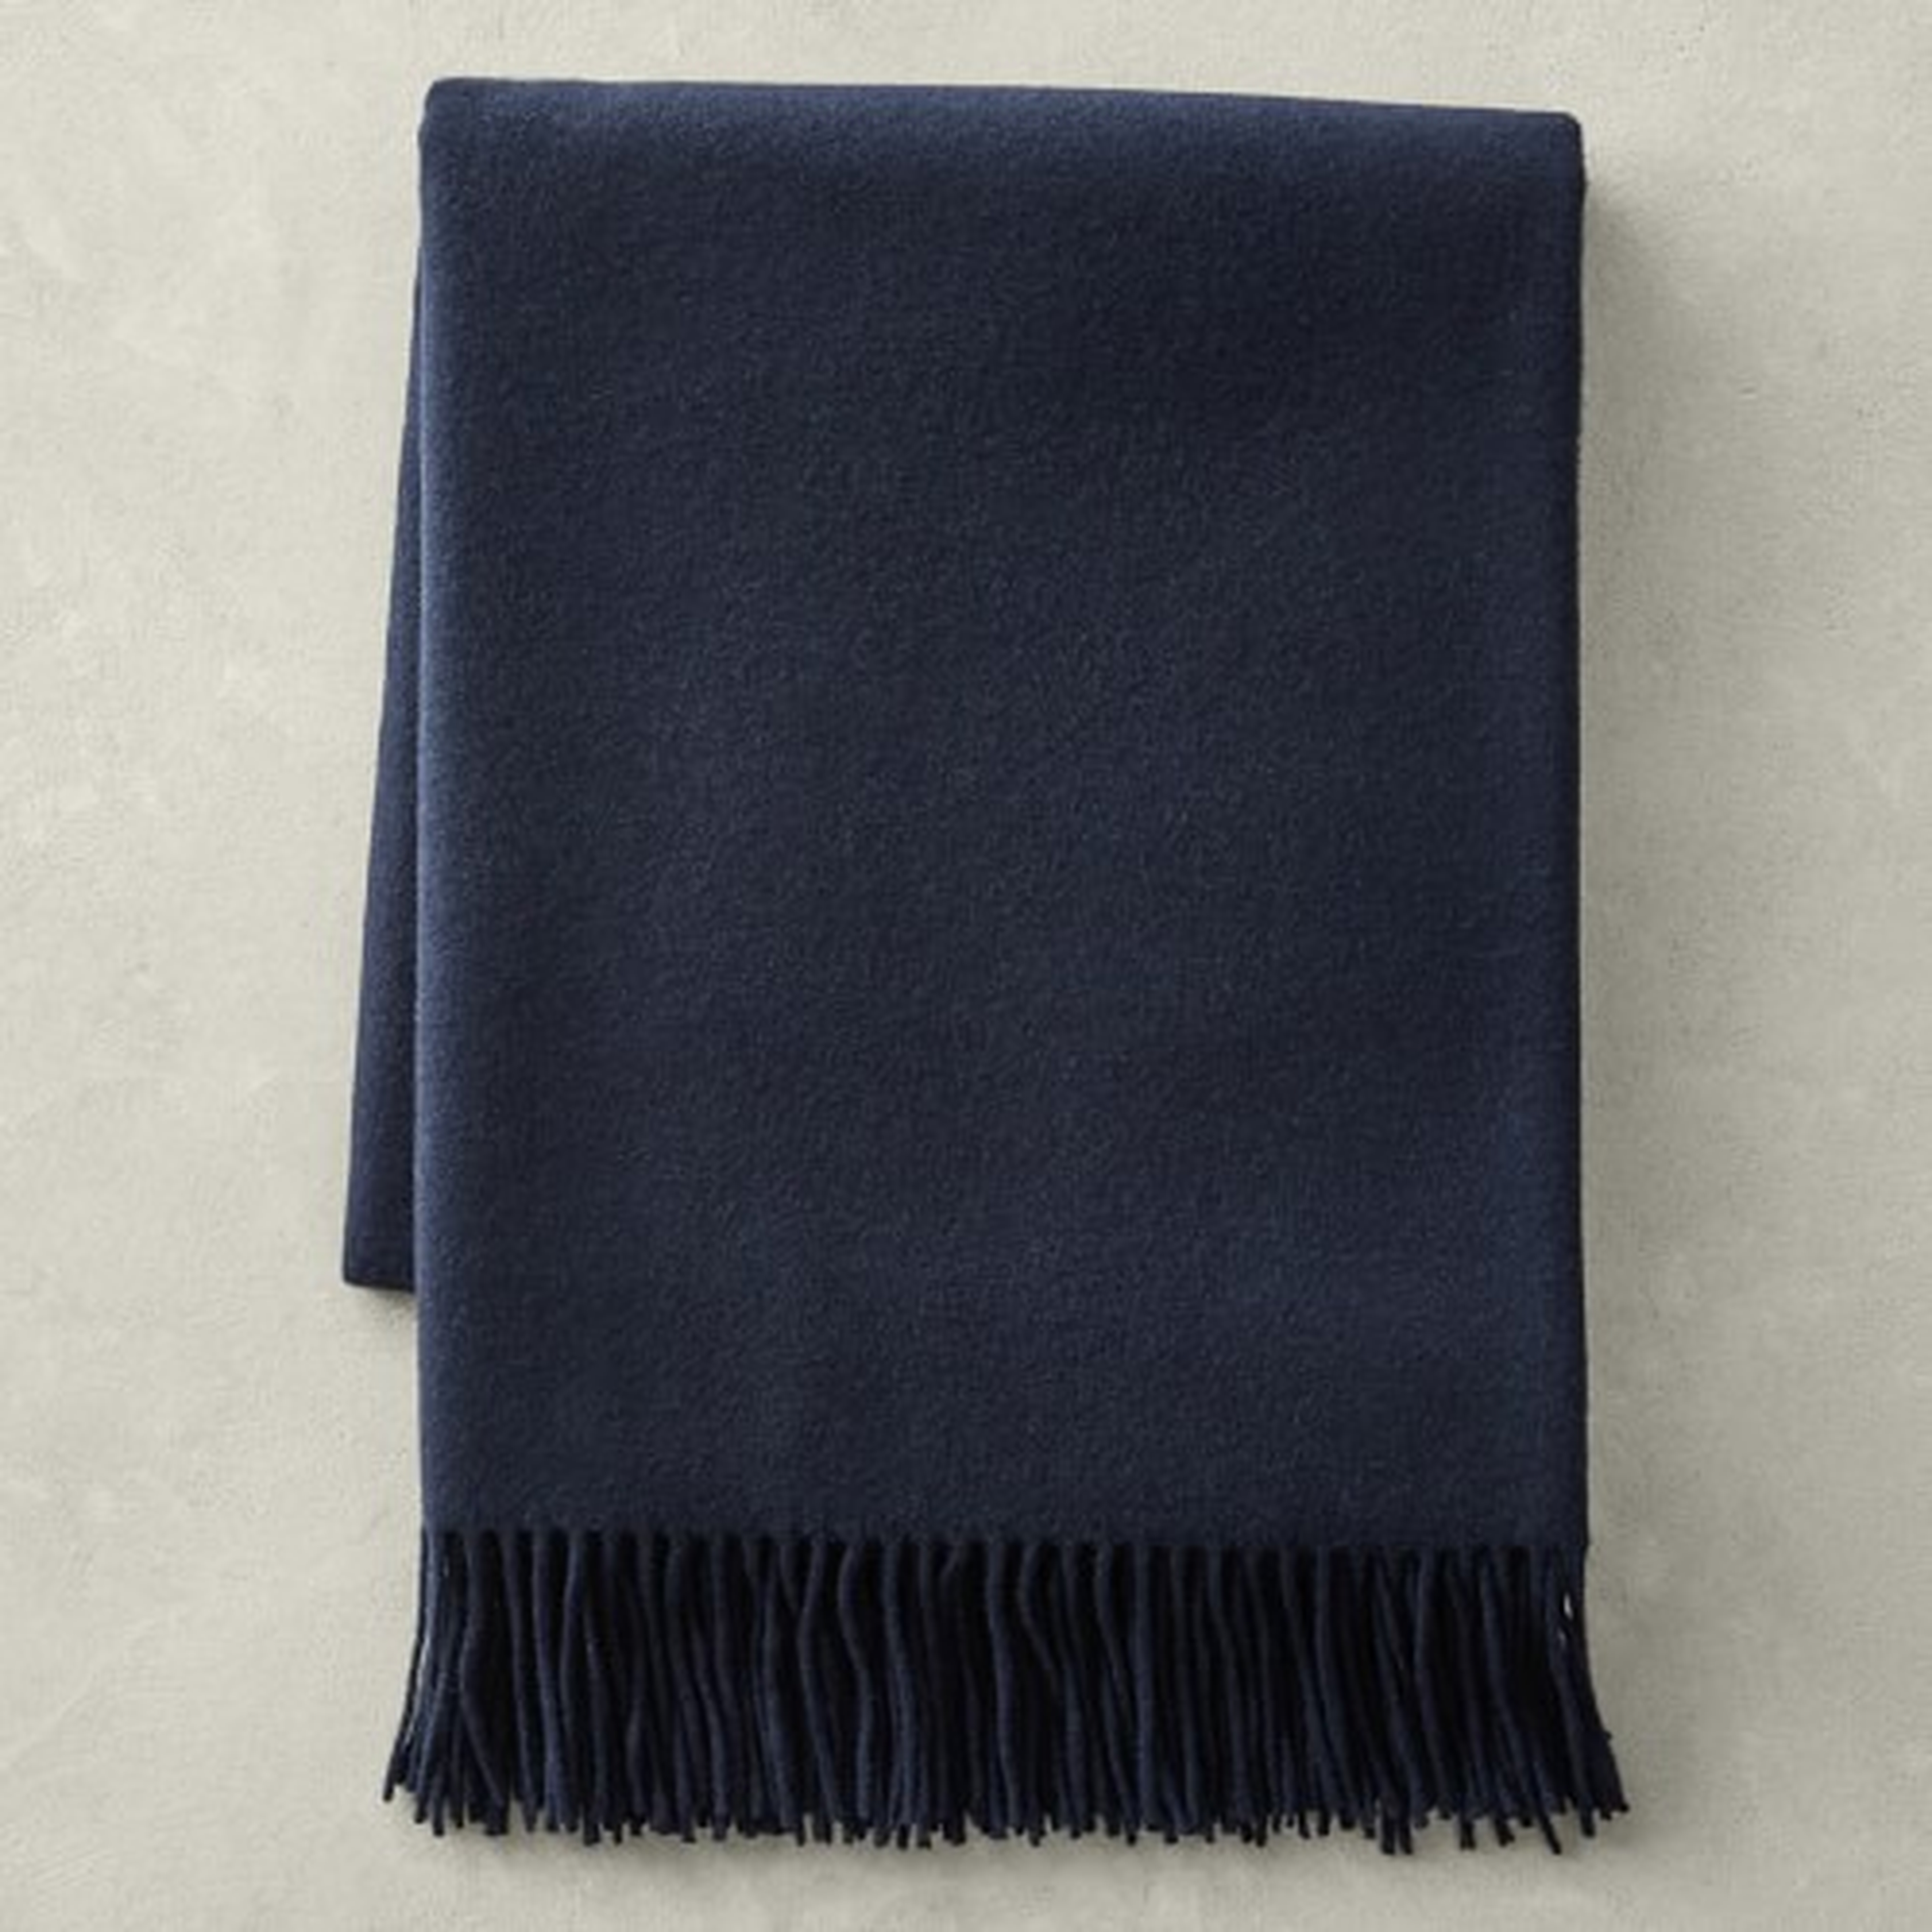 Solid Cashmere Throw, 50" X 65", Navy - Williams Sonoma